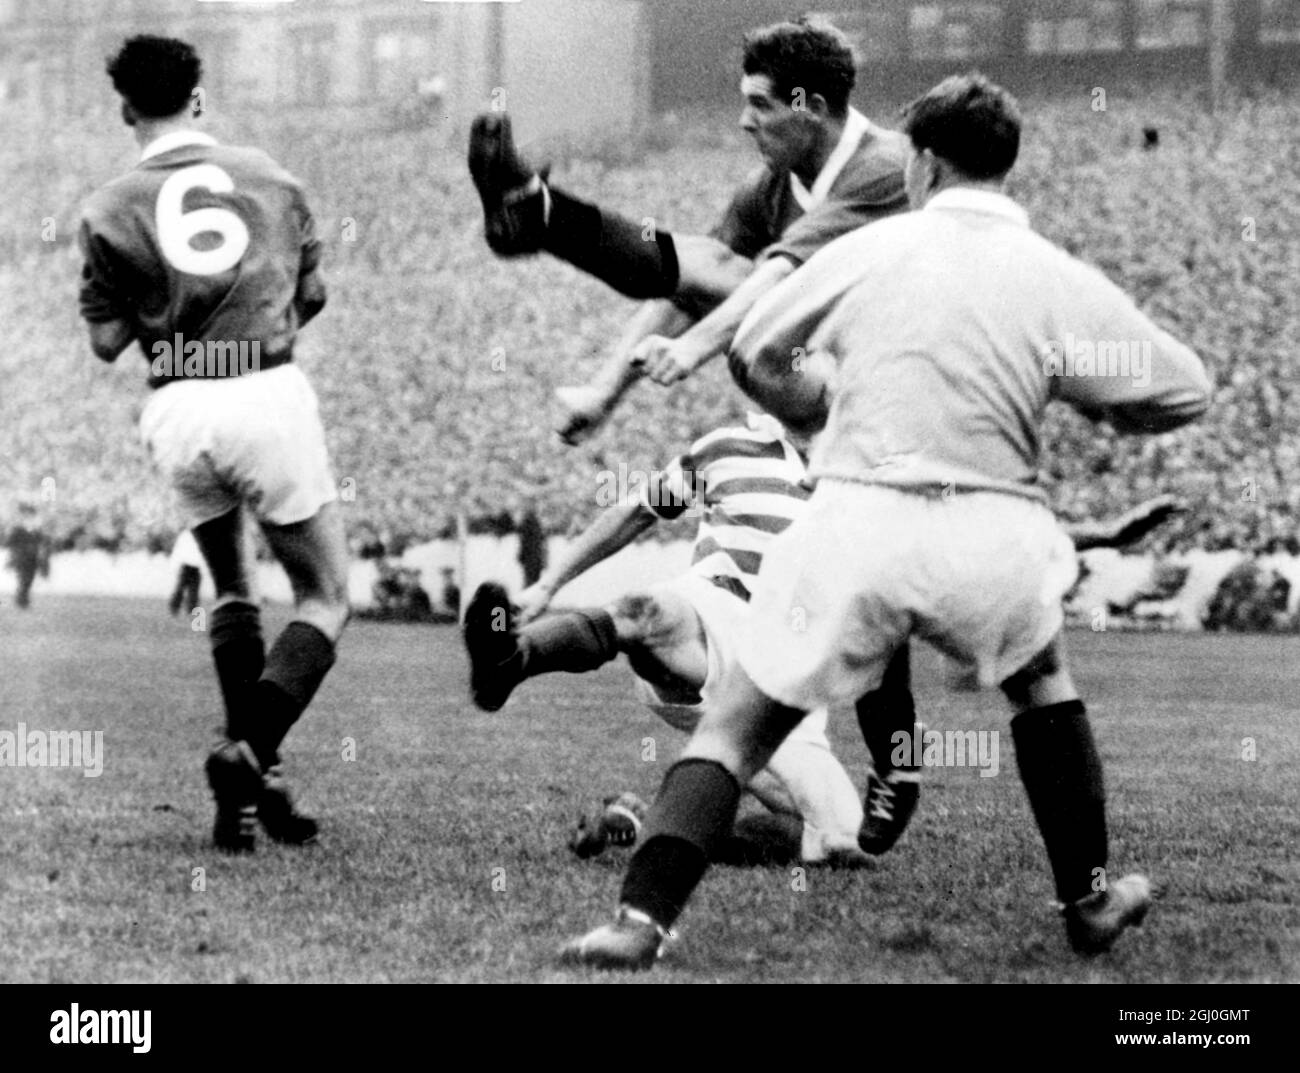 1960 Scottish League Cup Final Glasgow Rangers v Kilmarnock at Hampden Park. Rangers right-back, Shearer (centre kicking - kicks away from his goal as Black of Kilmarnock (striped shirt on ground) goes sprawling during yesterday's 29th Scottish League Cup final. The other two players in the photo are Baxter (No6) and goalkeeper, Niven (right) both of Rangers. 30th October 1960 Stock Photo